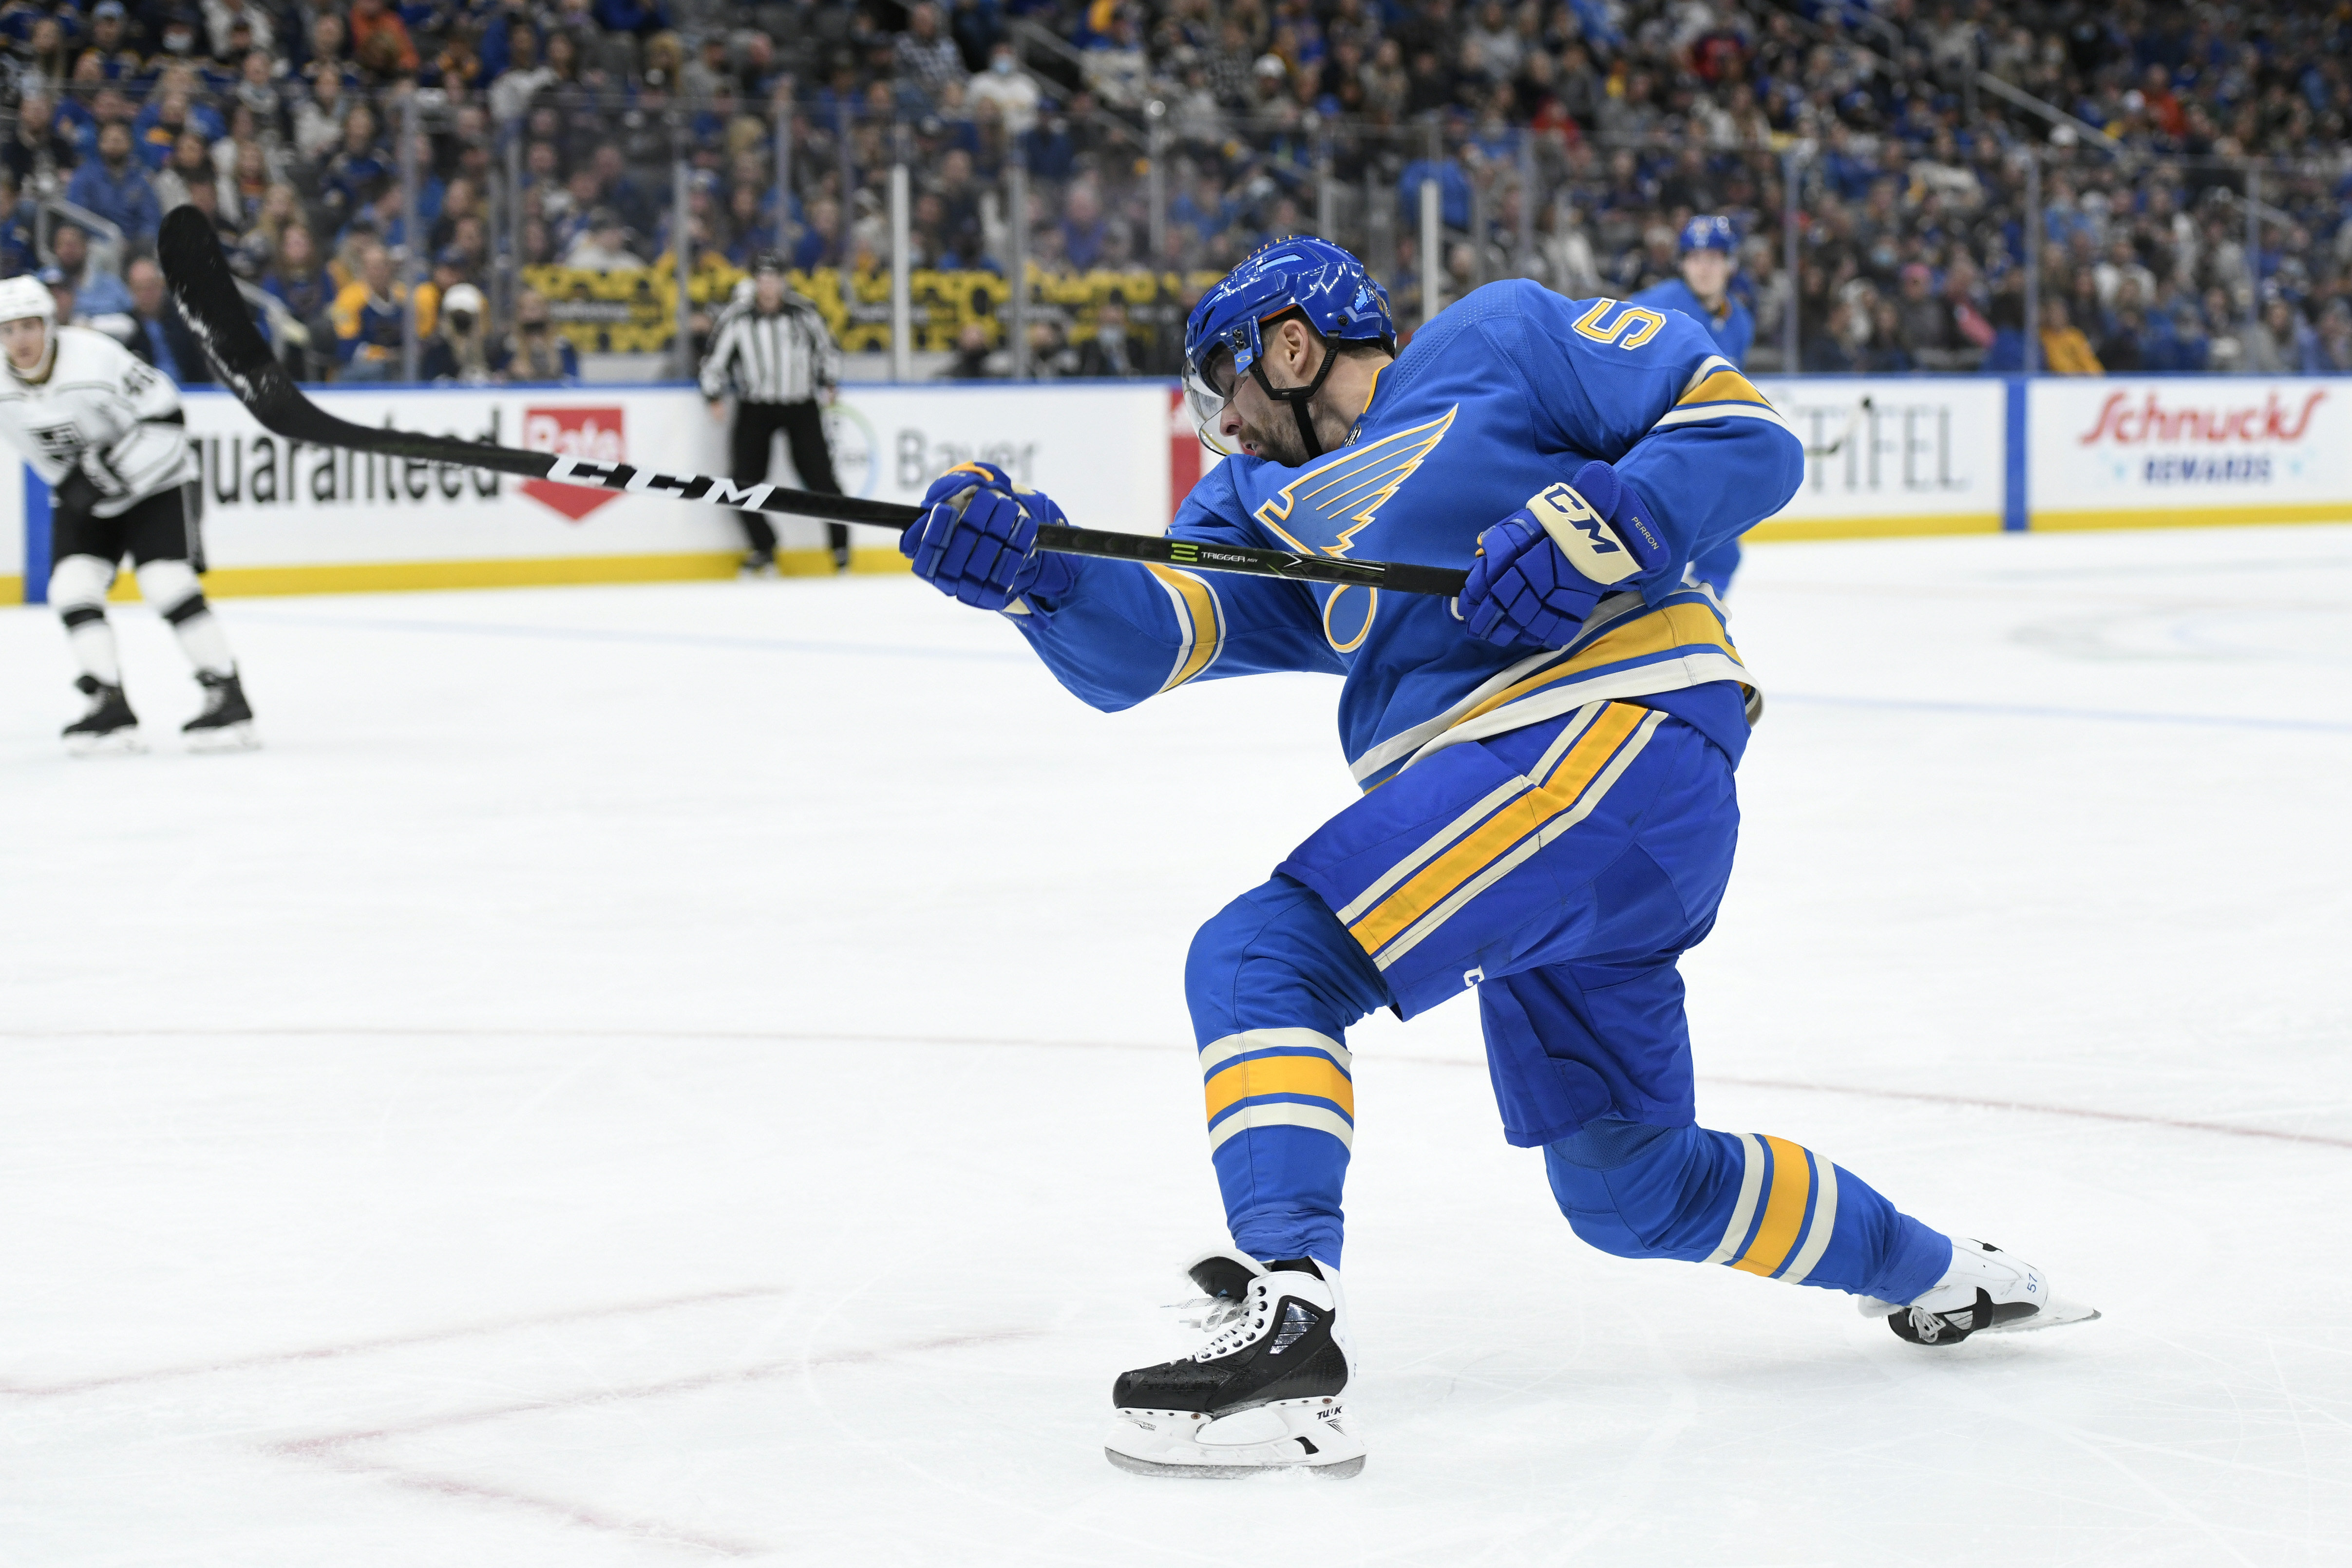 Blues star, David Perron reflects on team's loss and not being